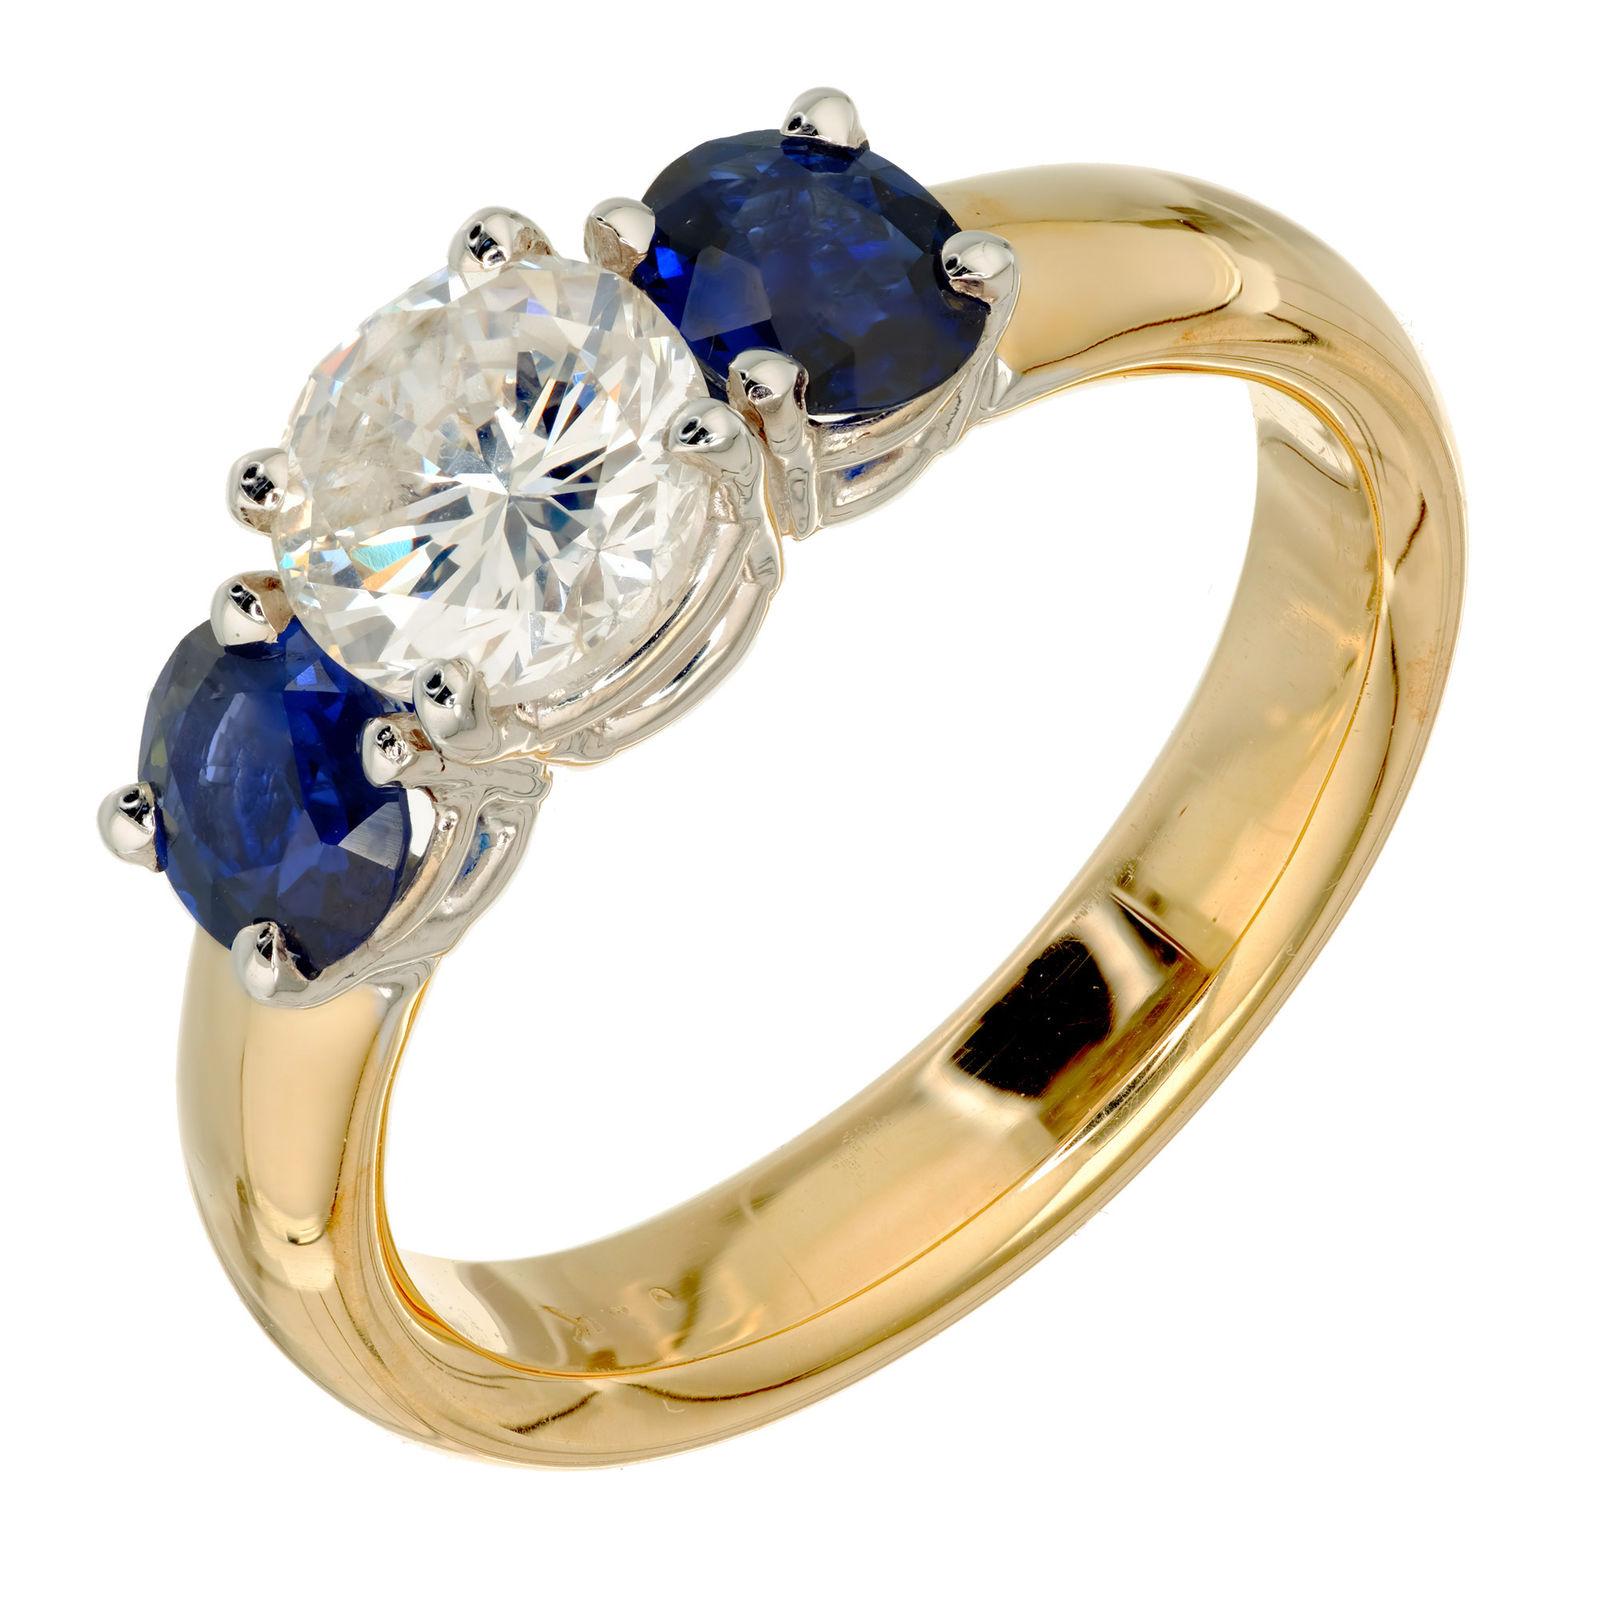 Three-Stone diamond and sapphire engagement ring. EGL certified round brilliant cut diamond, accented with two oval sapphires, in a 14k white and yellow gold setting designed in the Peter Suchy Workshop.

1 Round Brilliant Cut Diamond Approx. .86cts